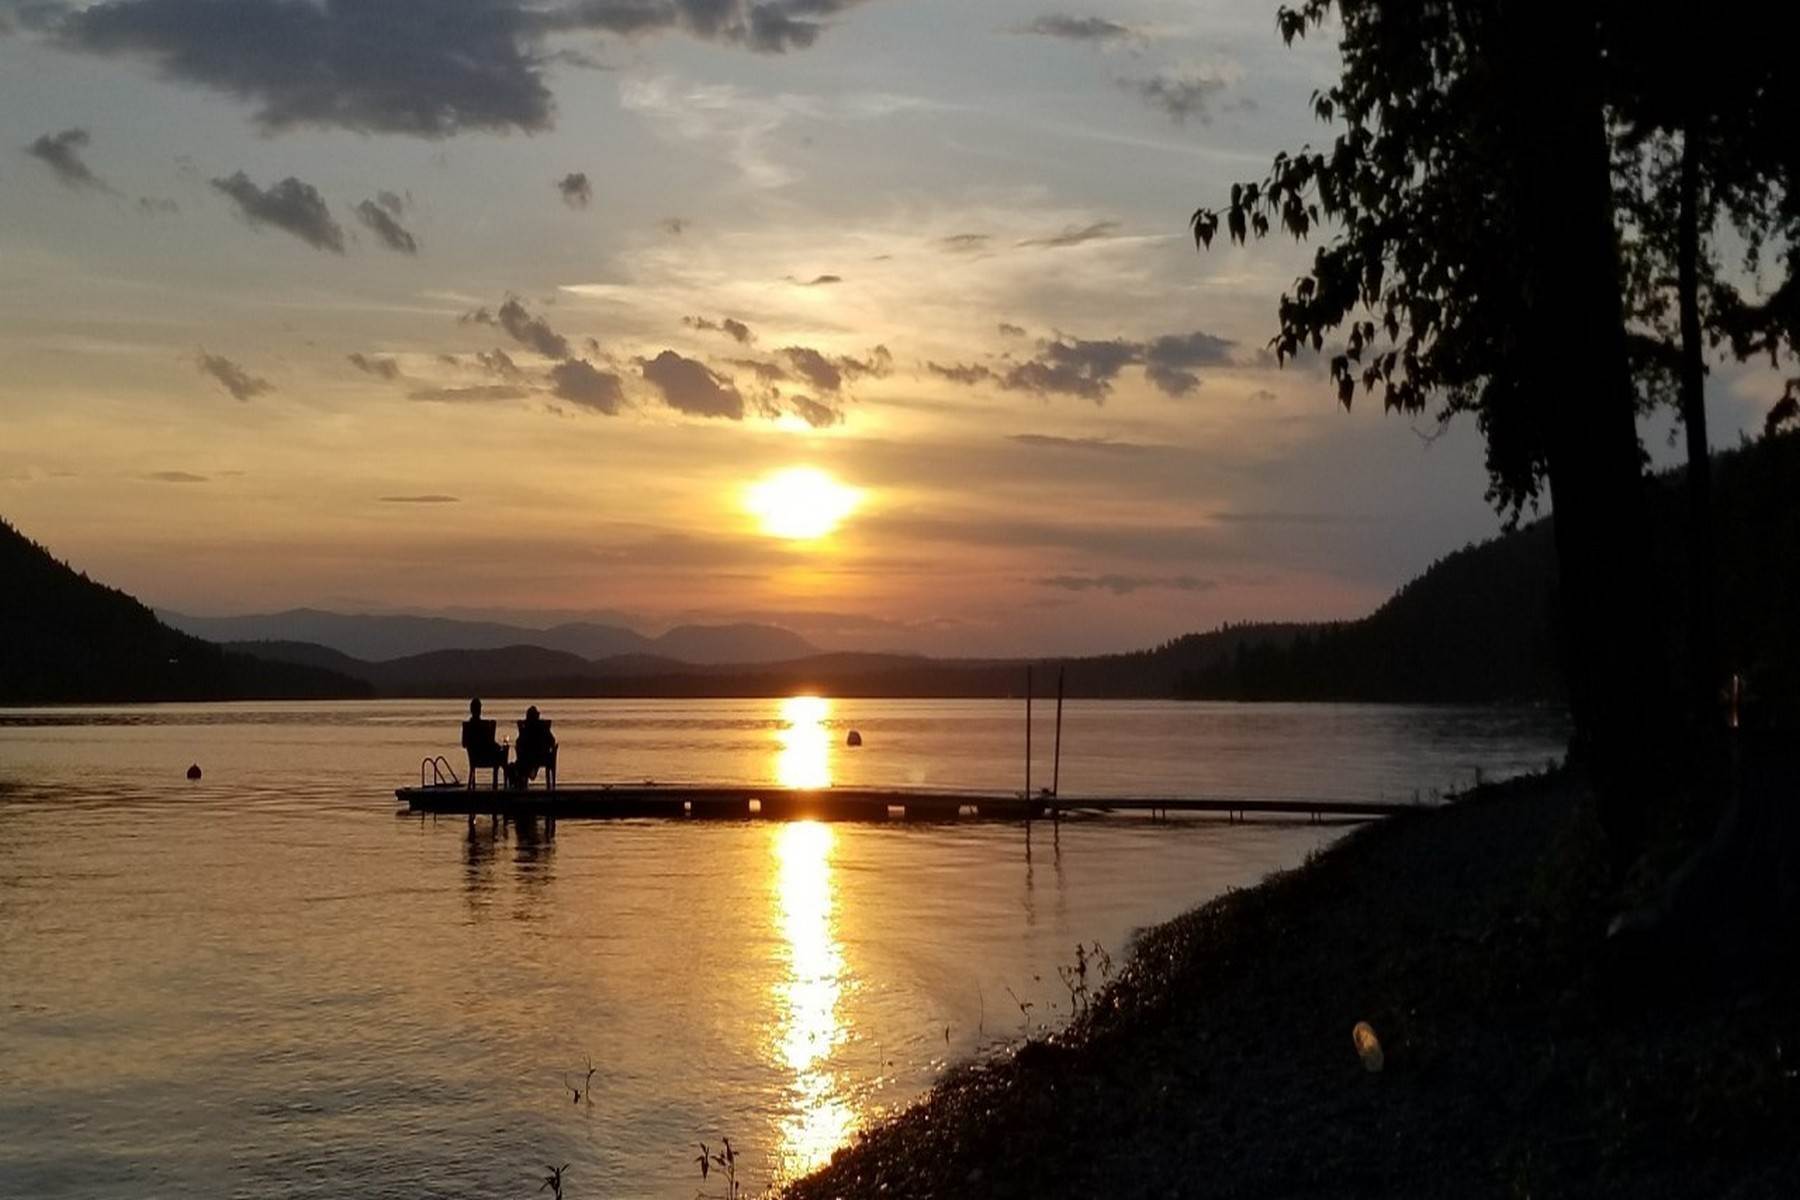 Land for Sale at Whitefish Lake View Lot with Private Beach and Lake Access Whitefish Lake View Lot with Private Beach and Lake Access, Whitefish, Montana 59937 United States